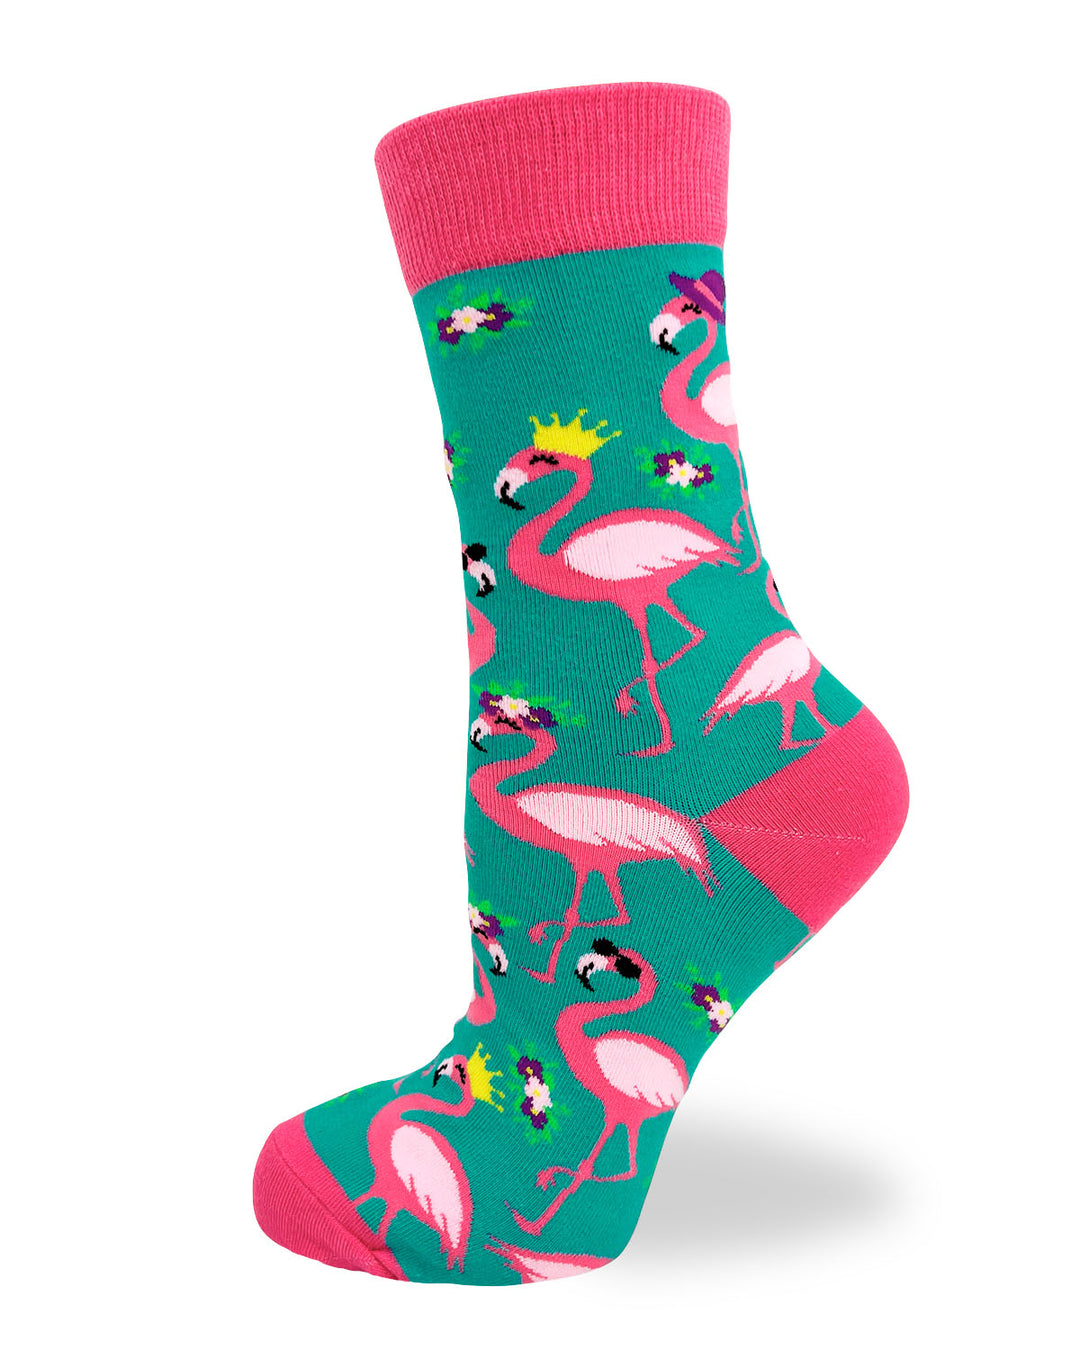 Sassy I Don't Give a Flock Ladies' Novelty Crew Socks Featuring Pink Flamingos